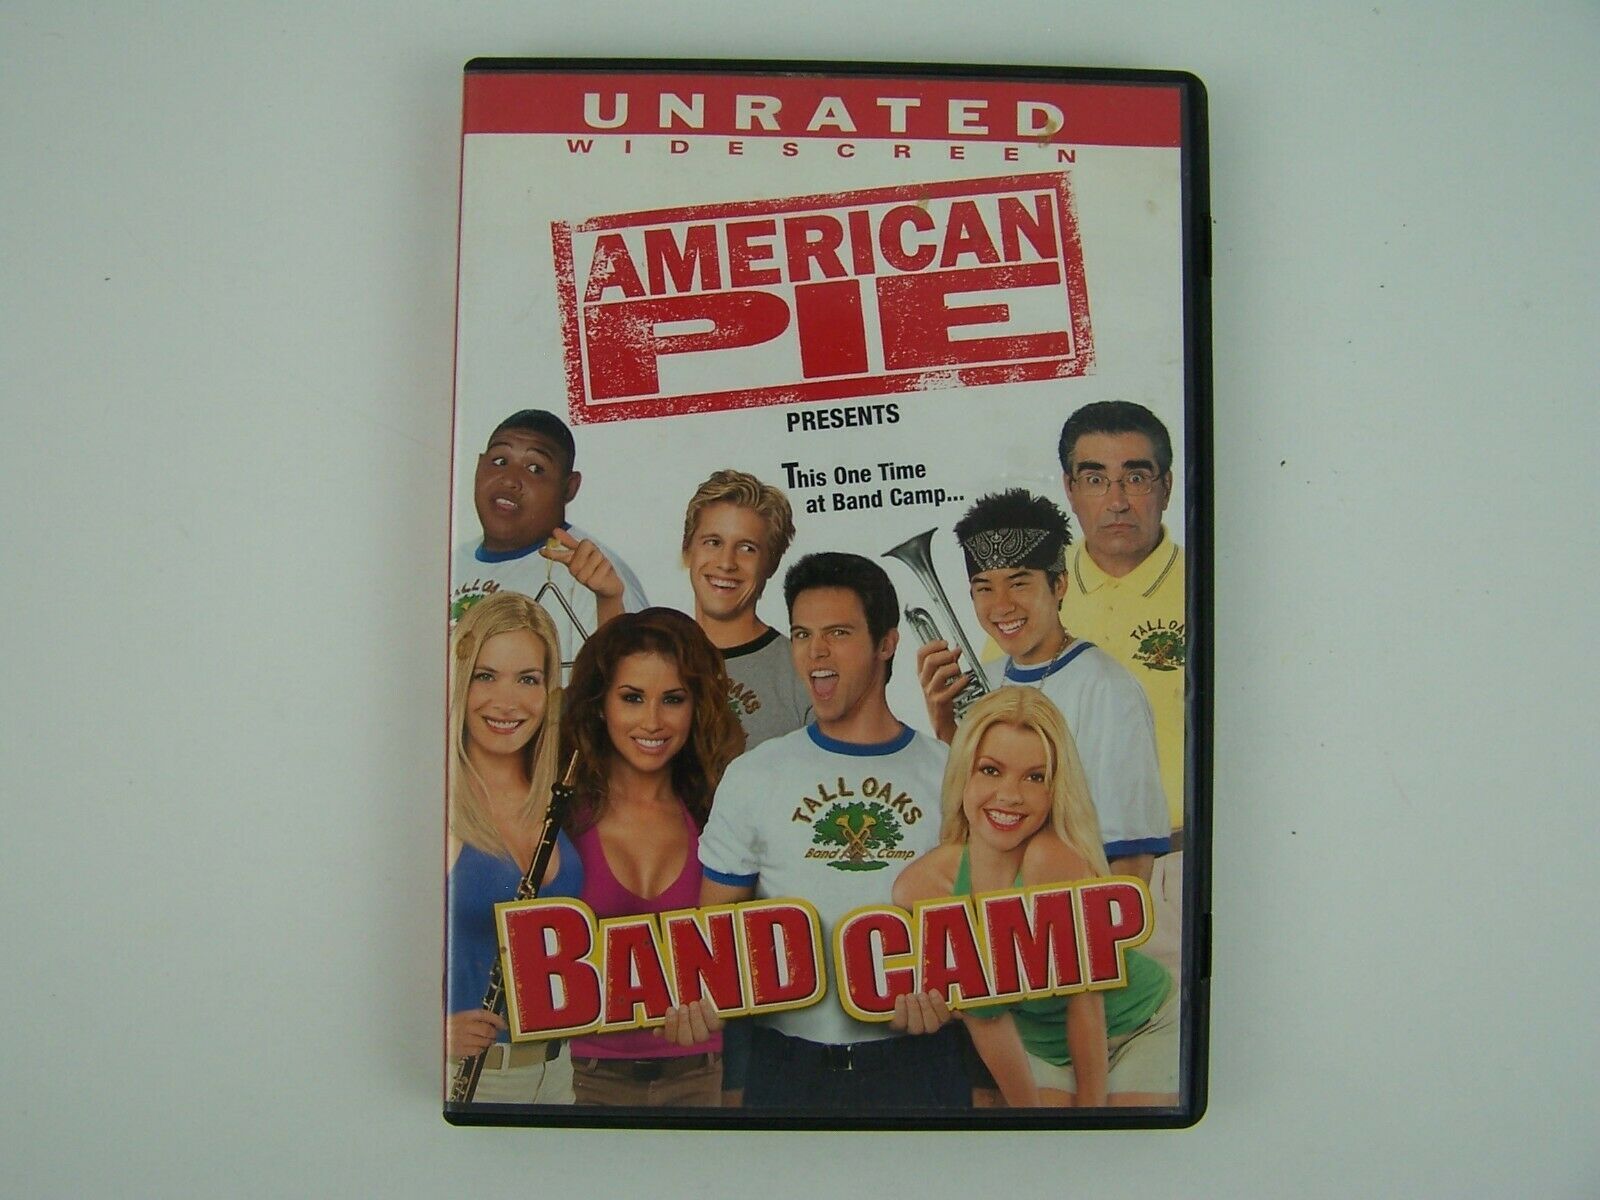 Primary image for American Pie Presents: Band Camp (Unrated Widescreen Edition) DVD